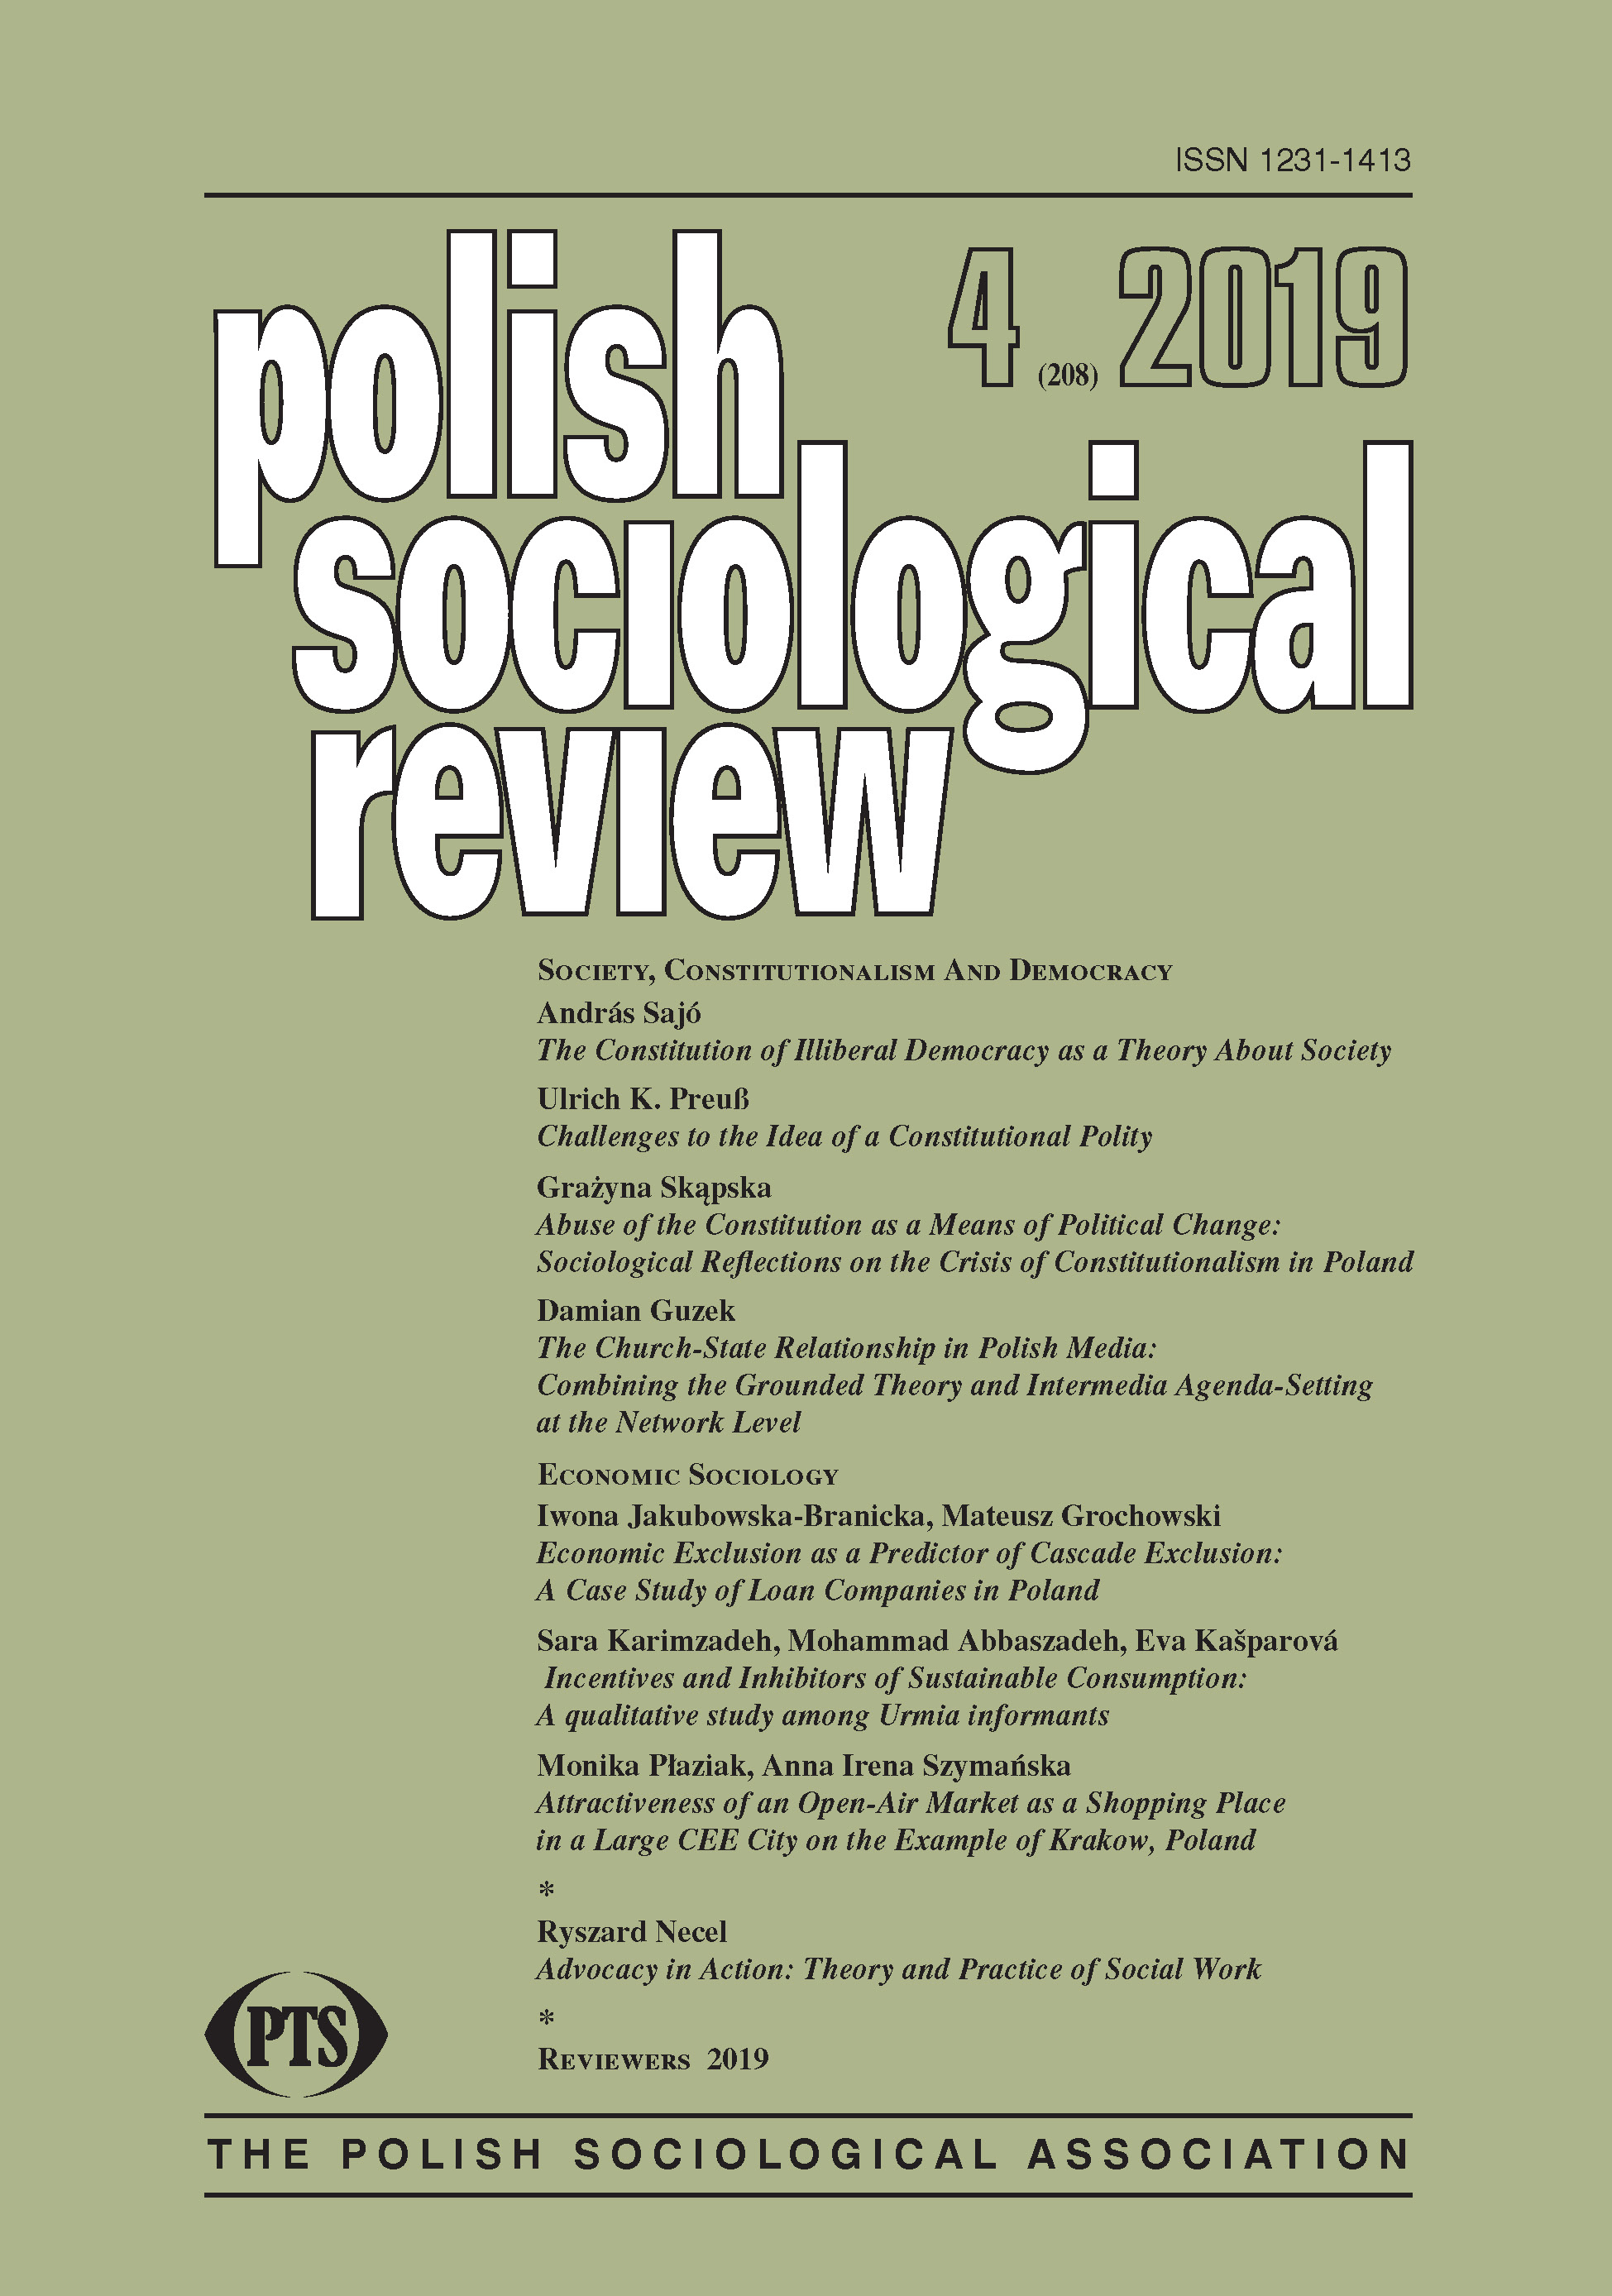 Abuse of the Constitution as a Means of Political Change:
Sociological Reflections on the Crisis of Constitutionalism in Poland Cover Image